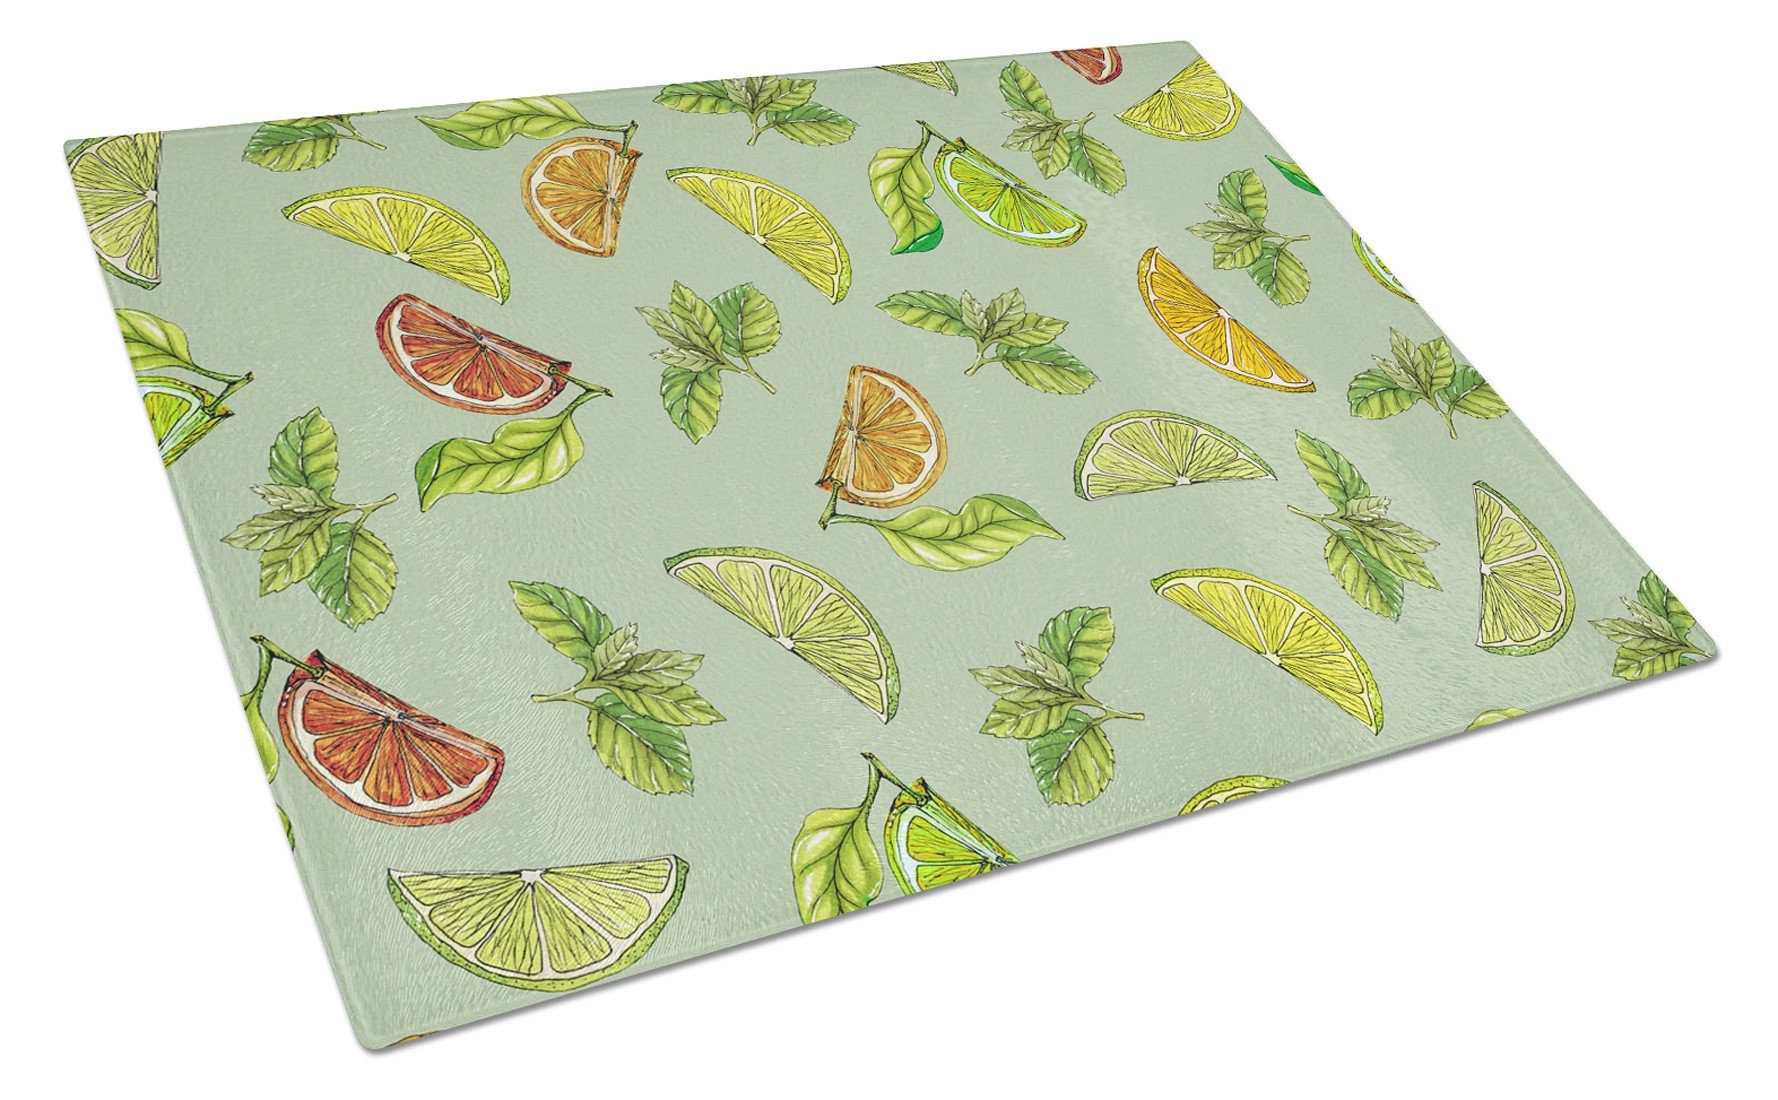 Lemons, Limes and Oranges Glass Cutting Board Large BB5206LCB by Caroline's Treasures